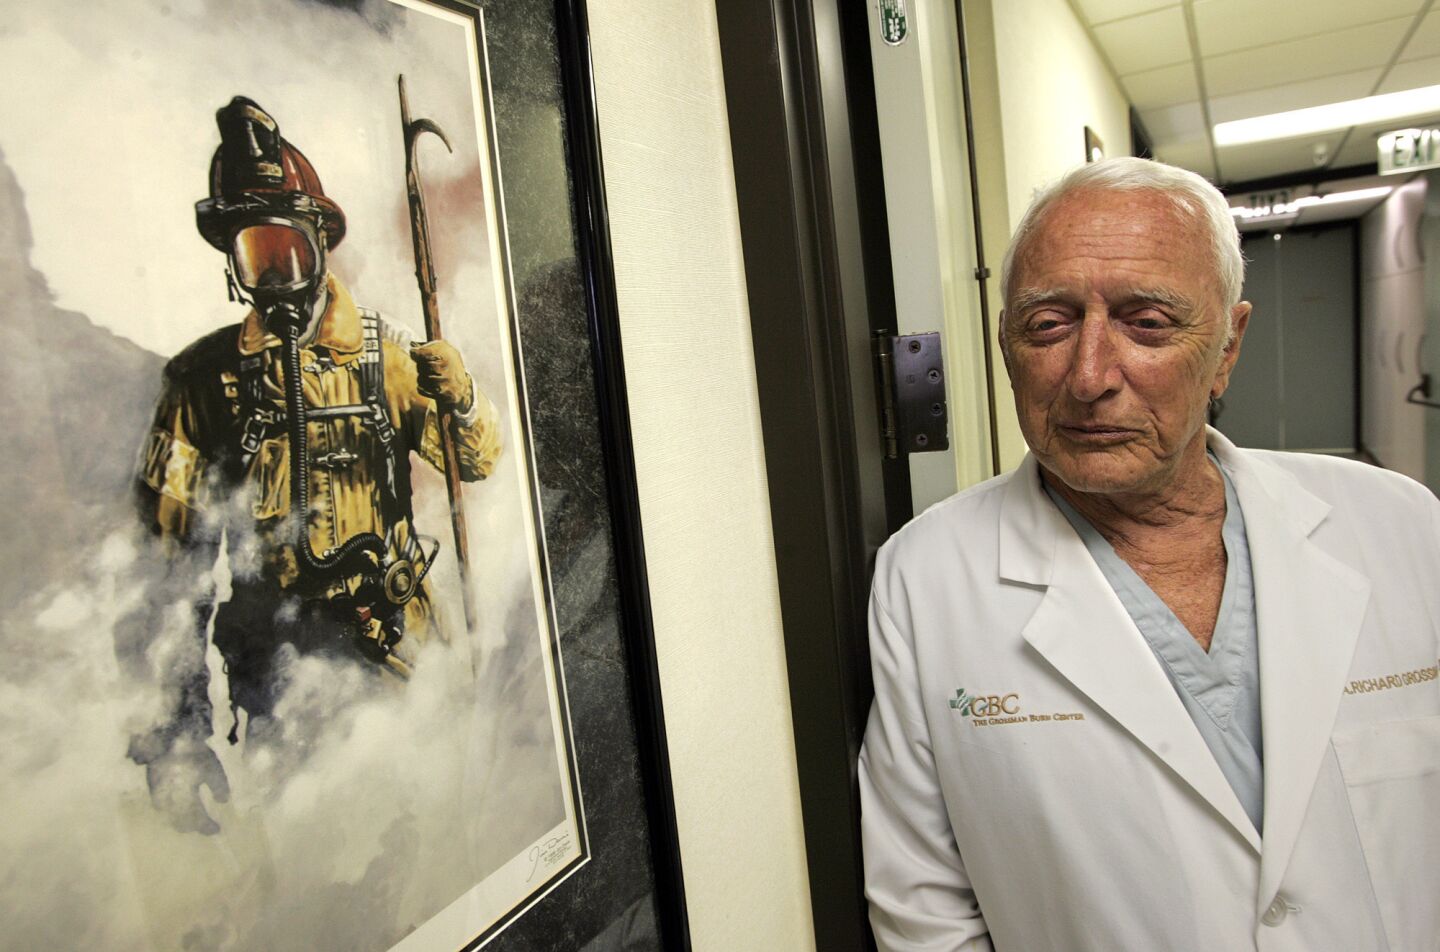 The renowned plastic and reconstructive surgeon pioneered the comprehensive care of burn patients in Sherman Oaks. He established what became the nation's largest private burn-treatment center. He was 81.